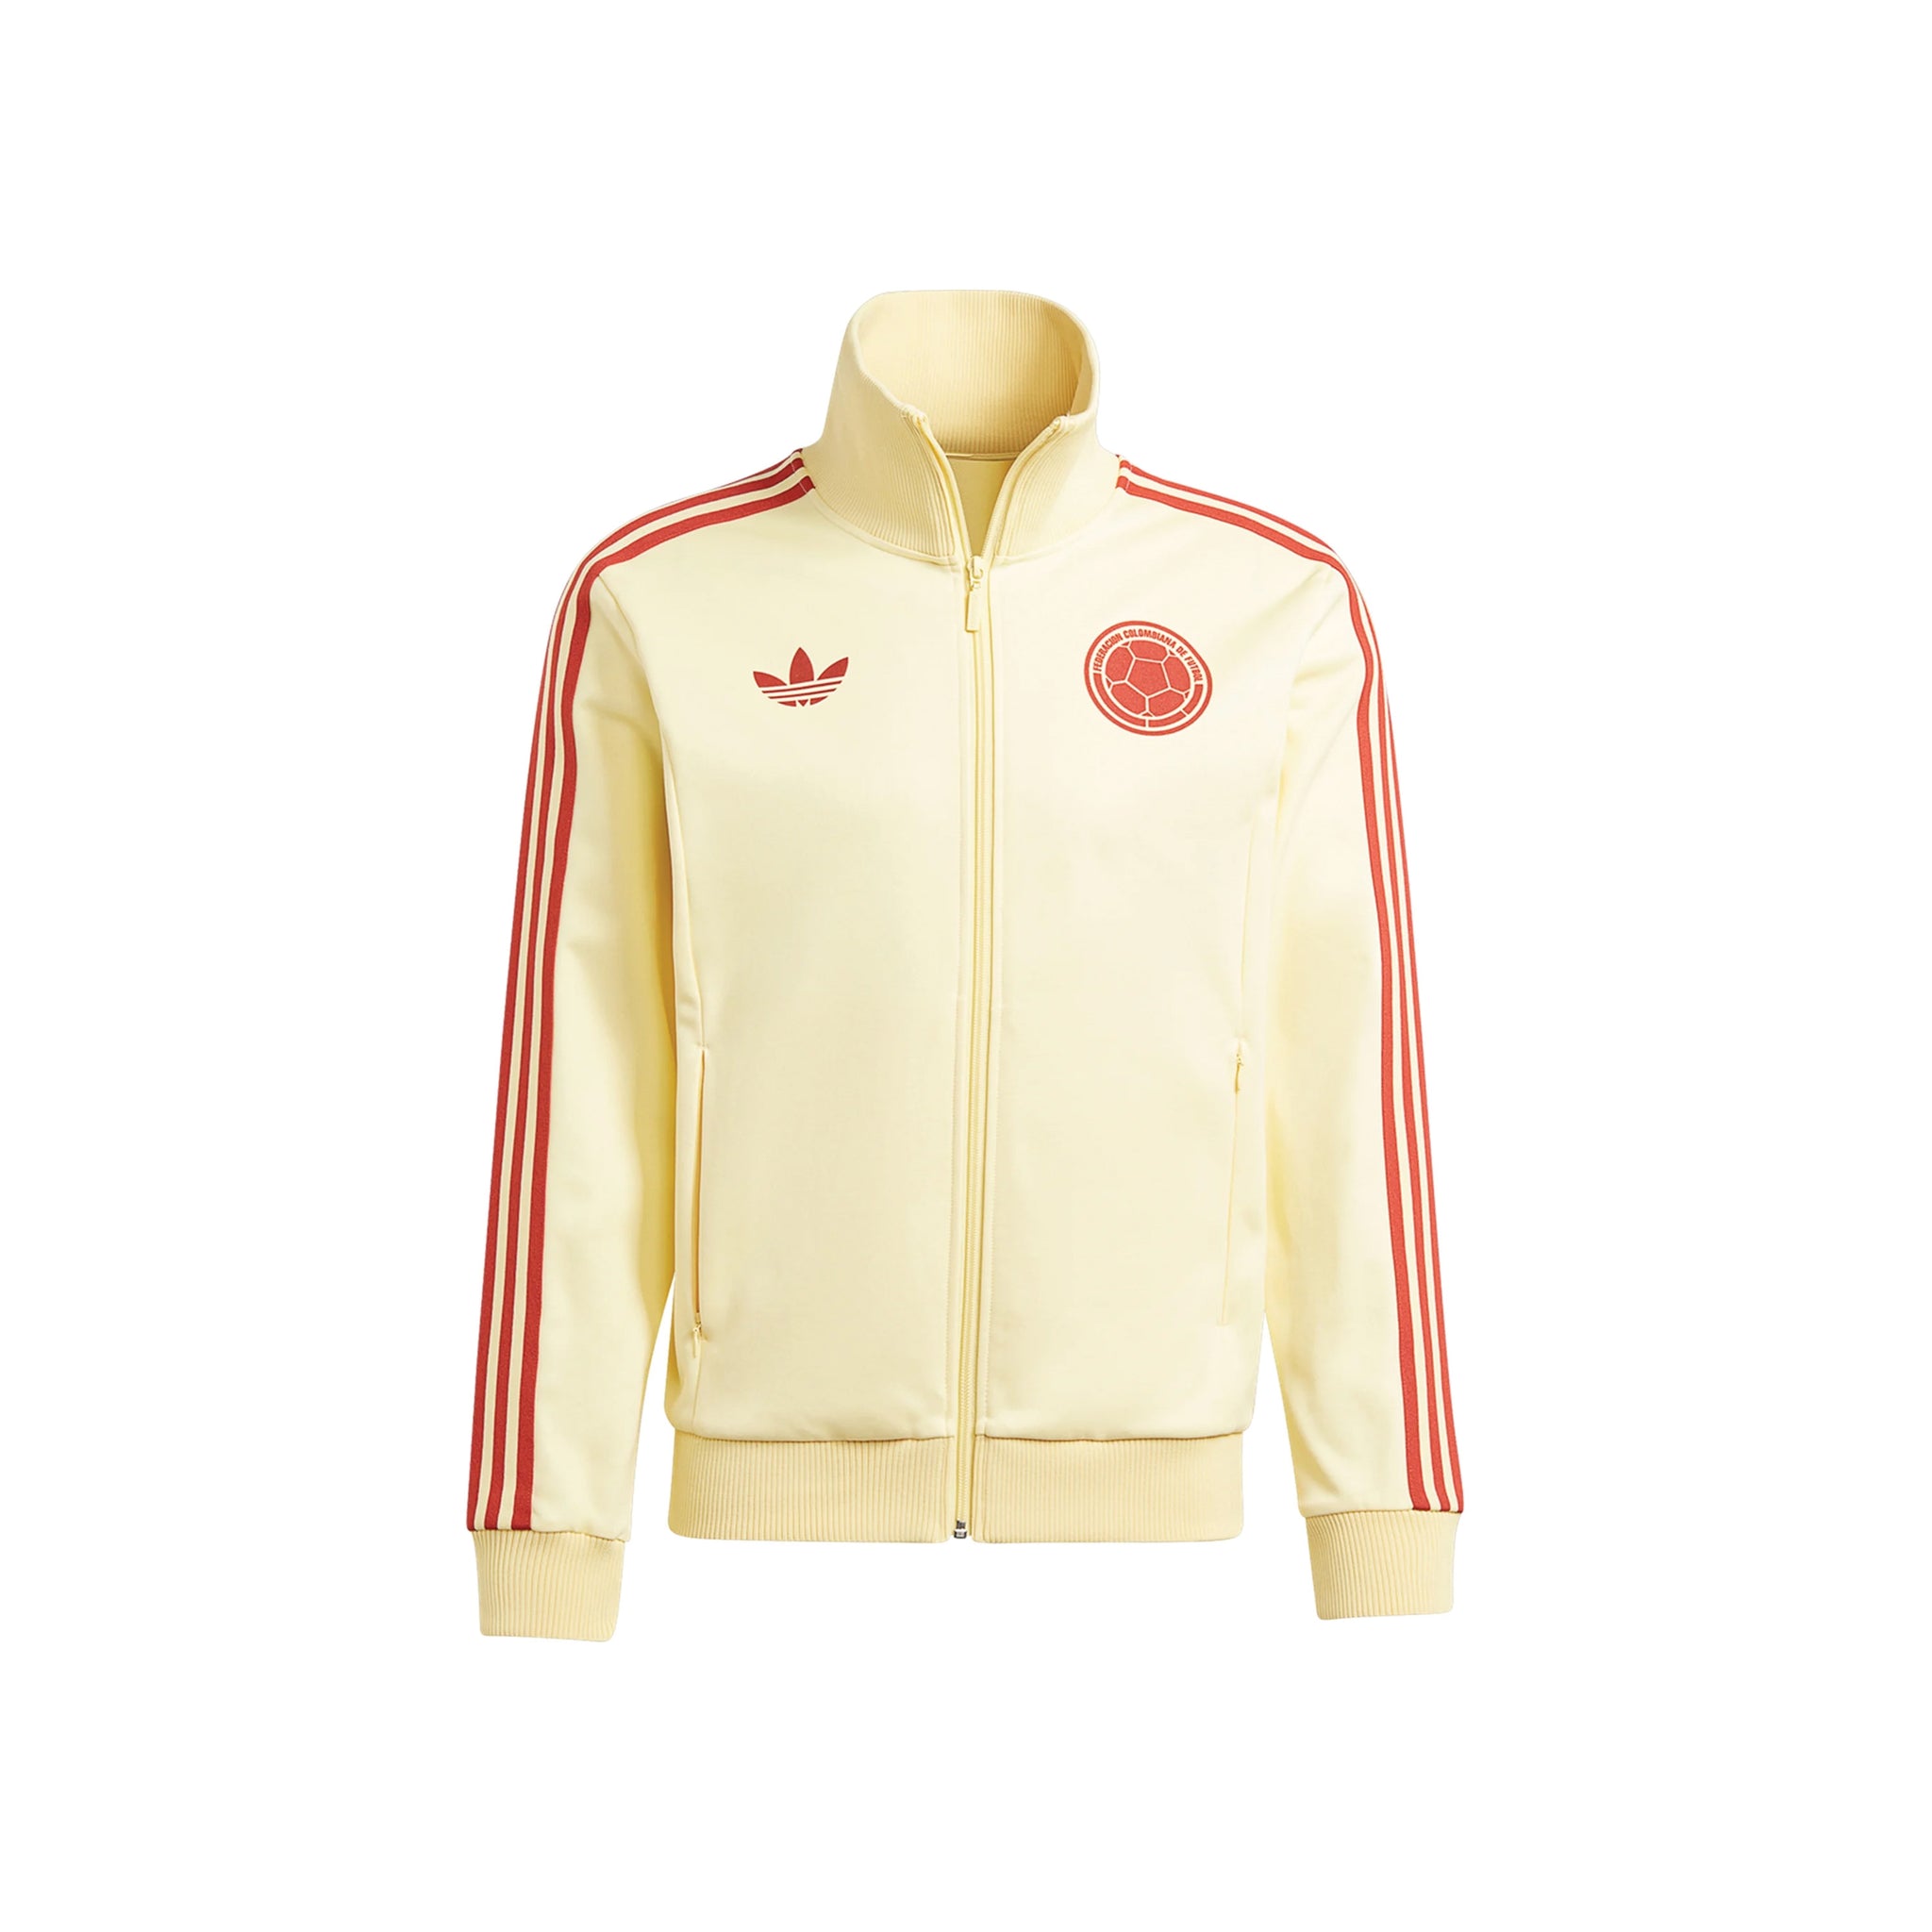 ADIDAS Colombia Beckenbauer Track Top Jacket